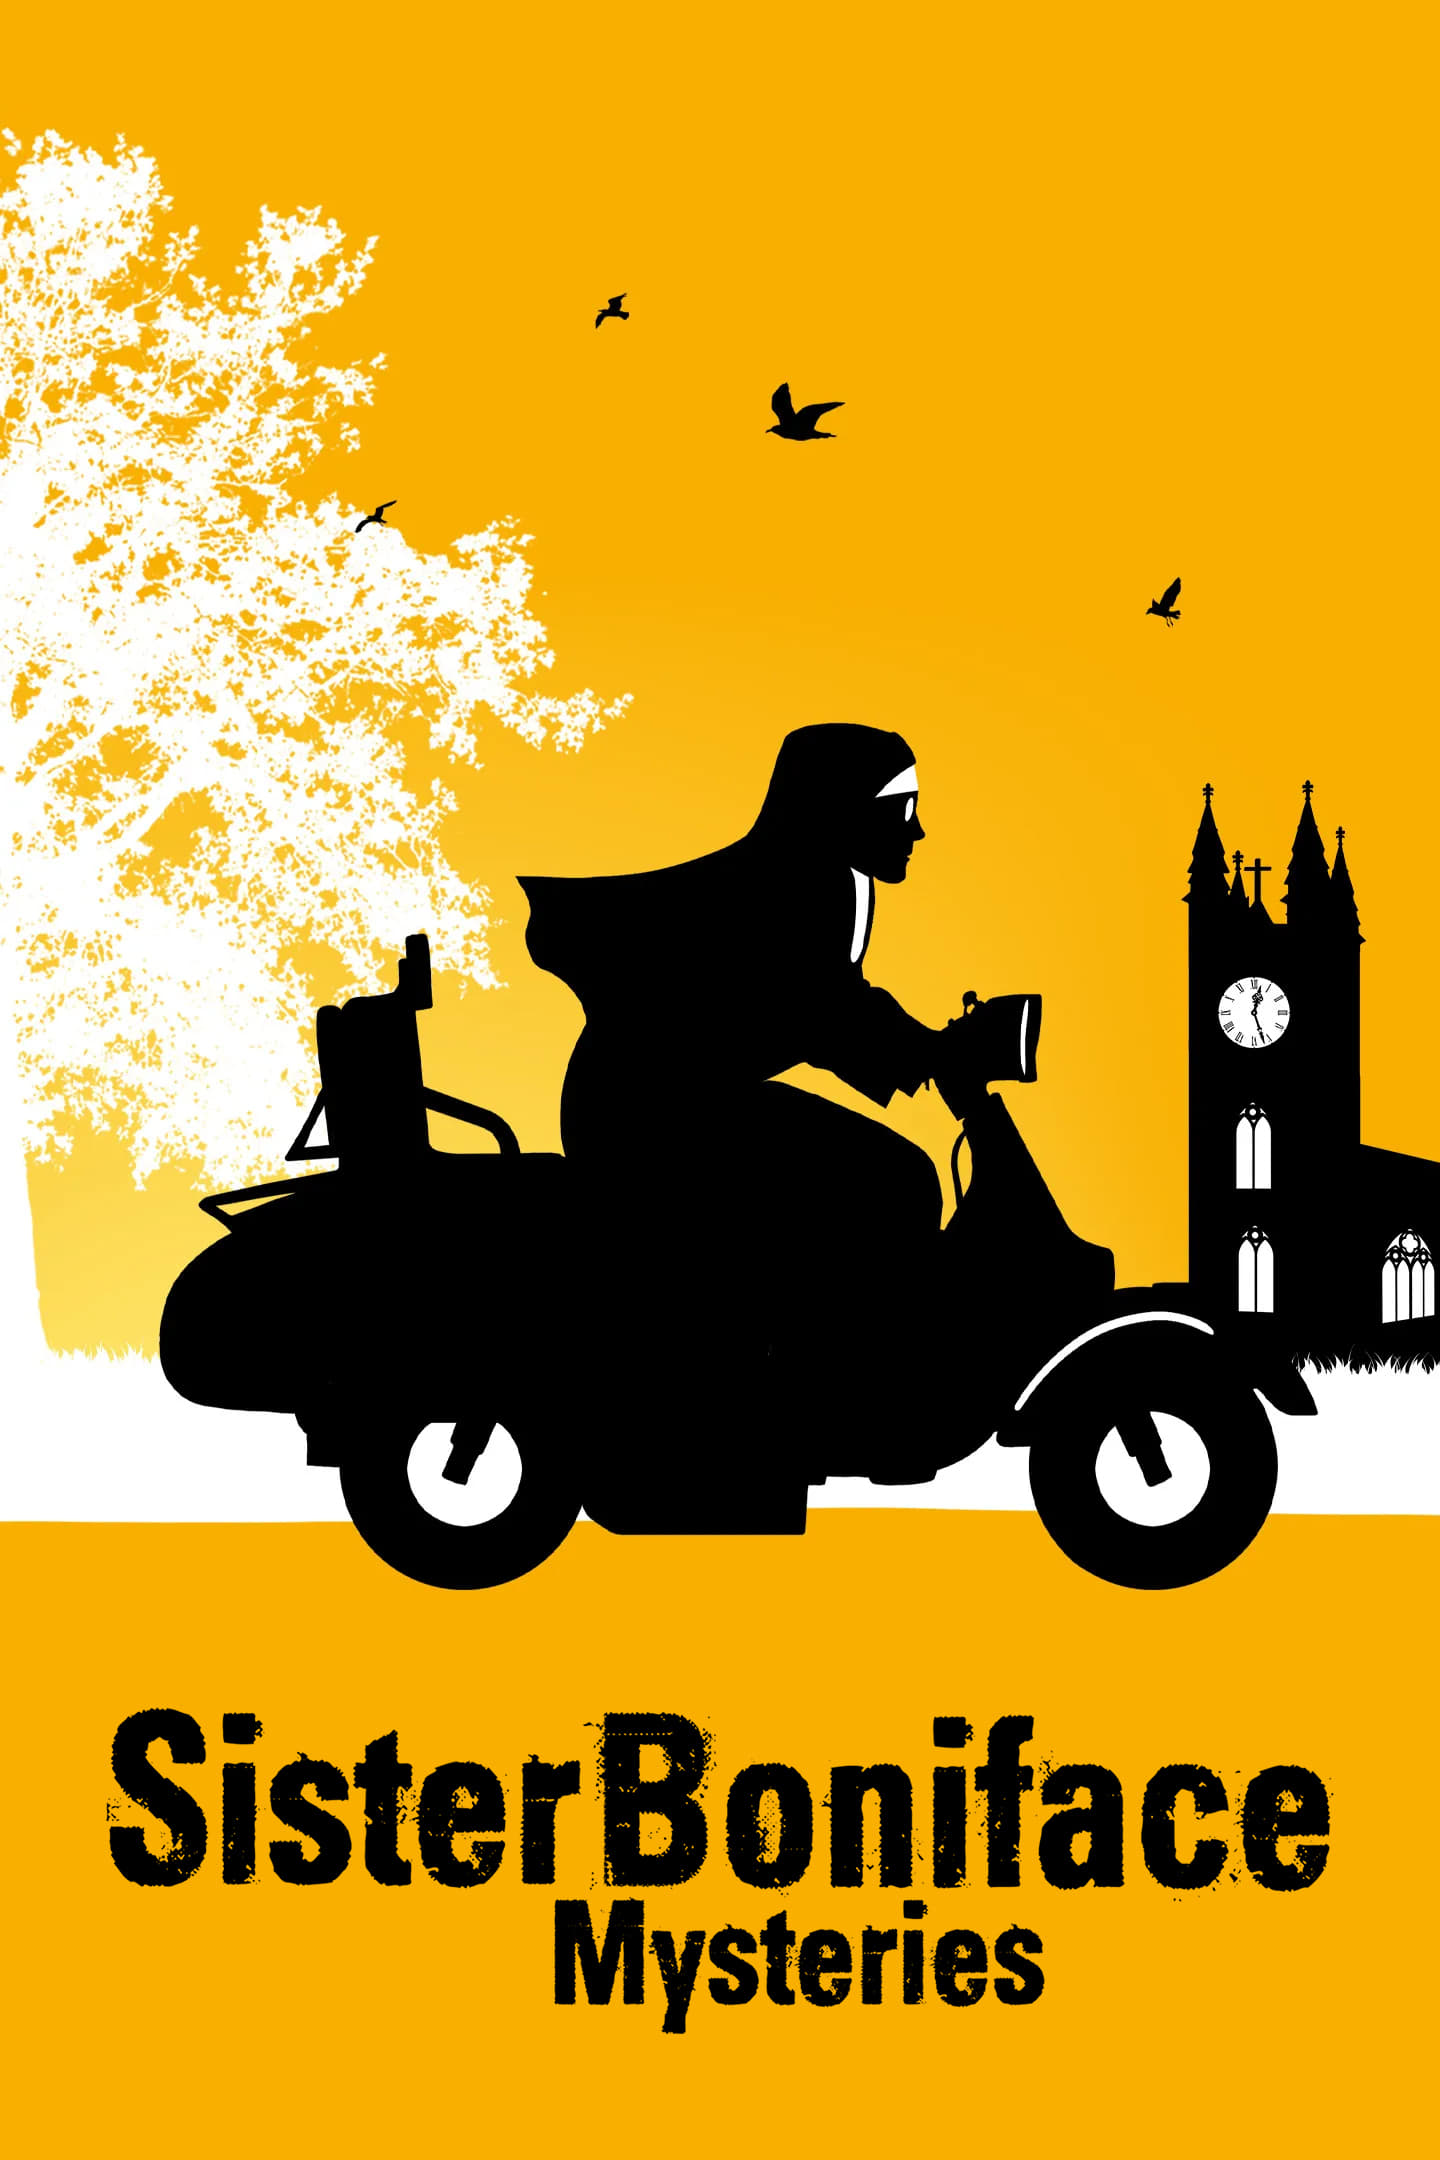 Sister Boniface Mysteries TV Shows About Catholic Church